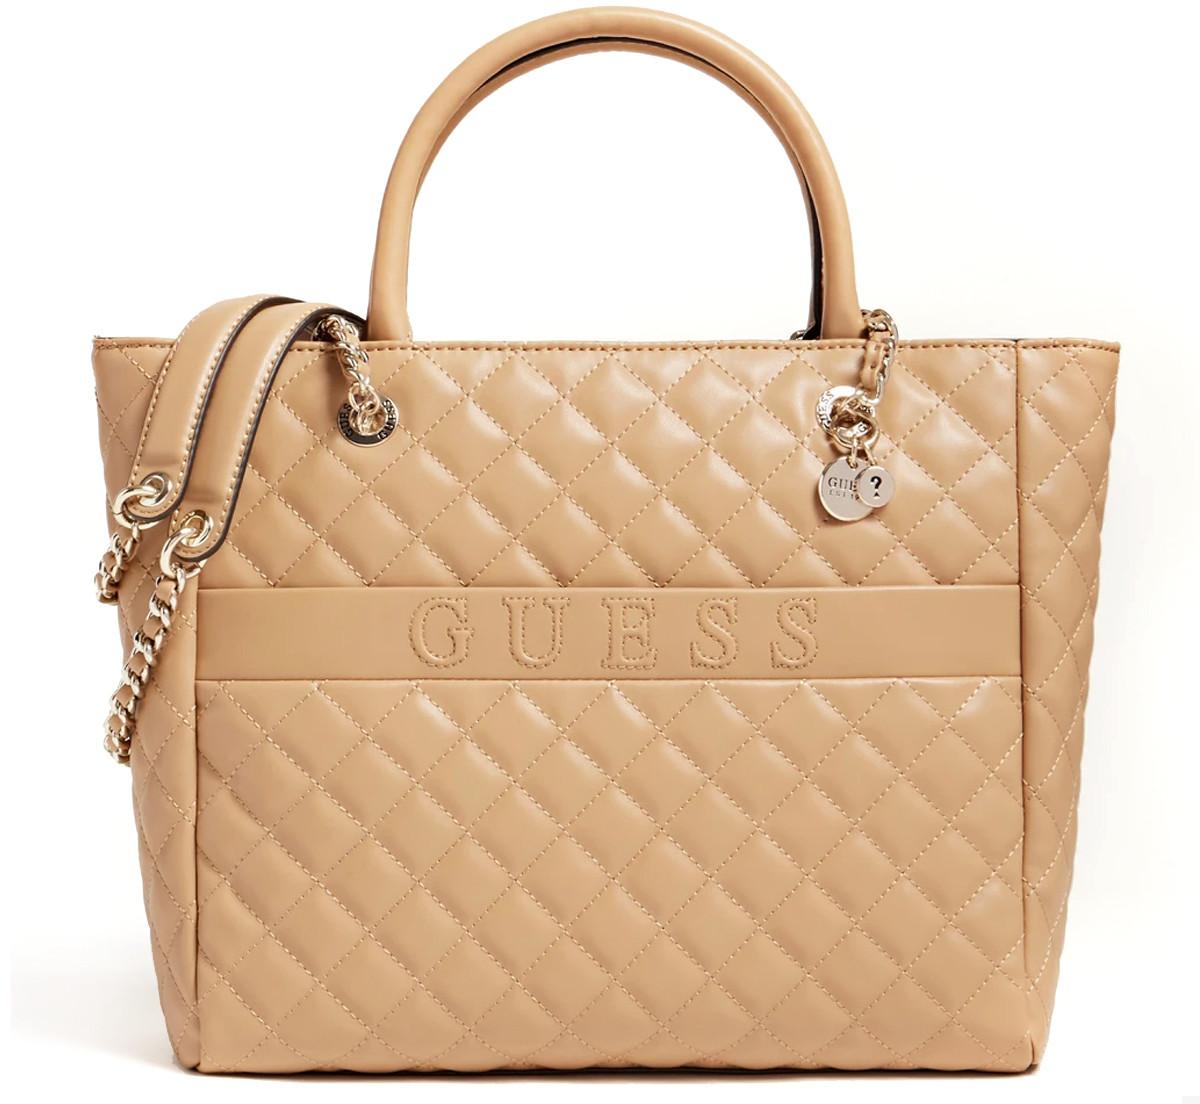 Guess Camel Illy Tote Bag at FORZIERI